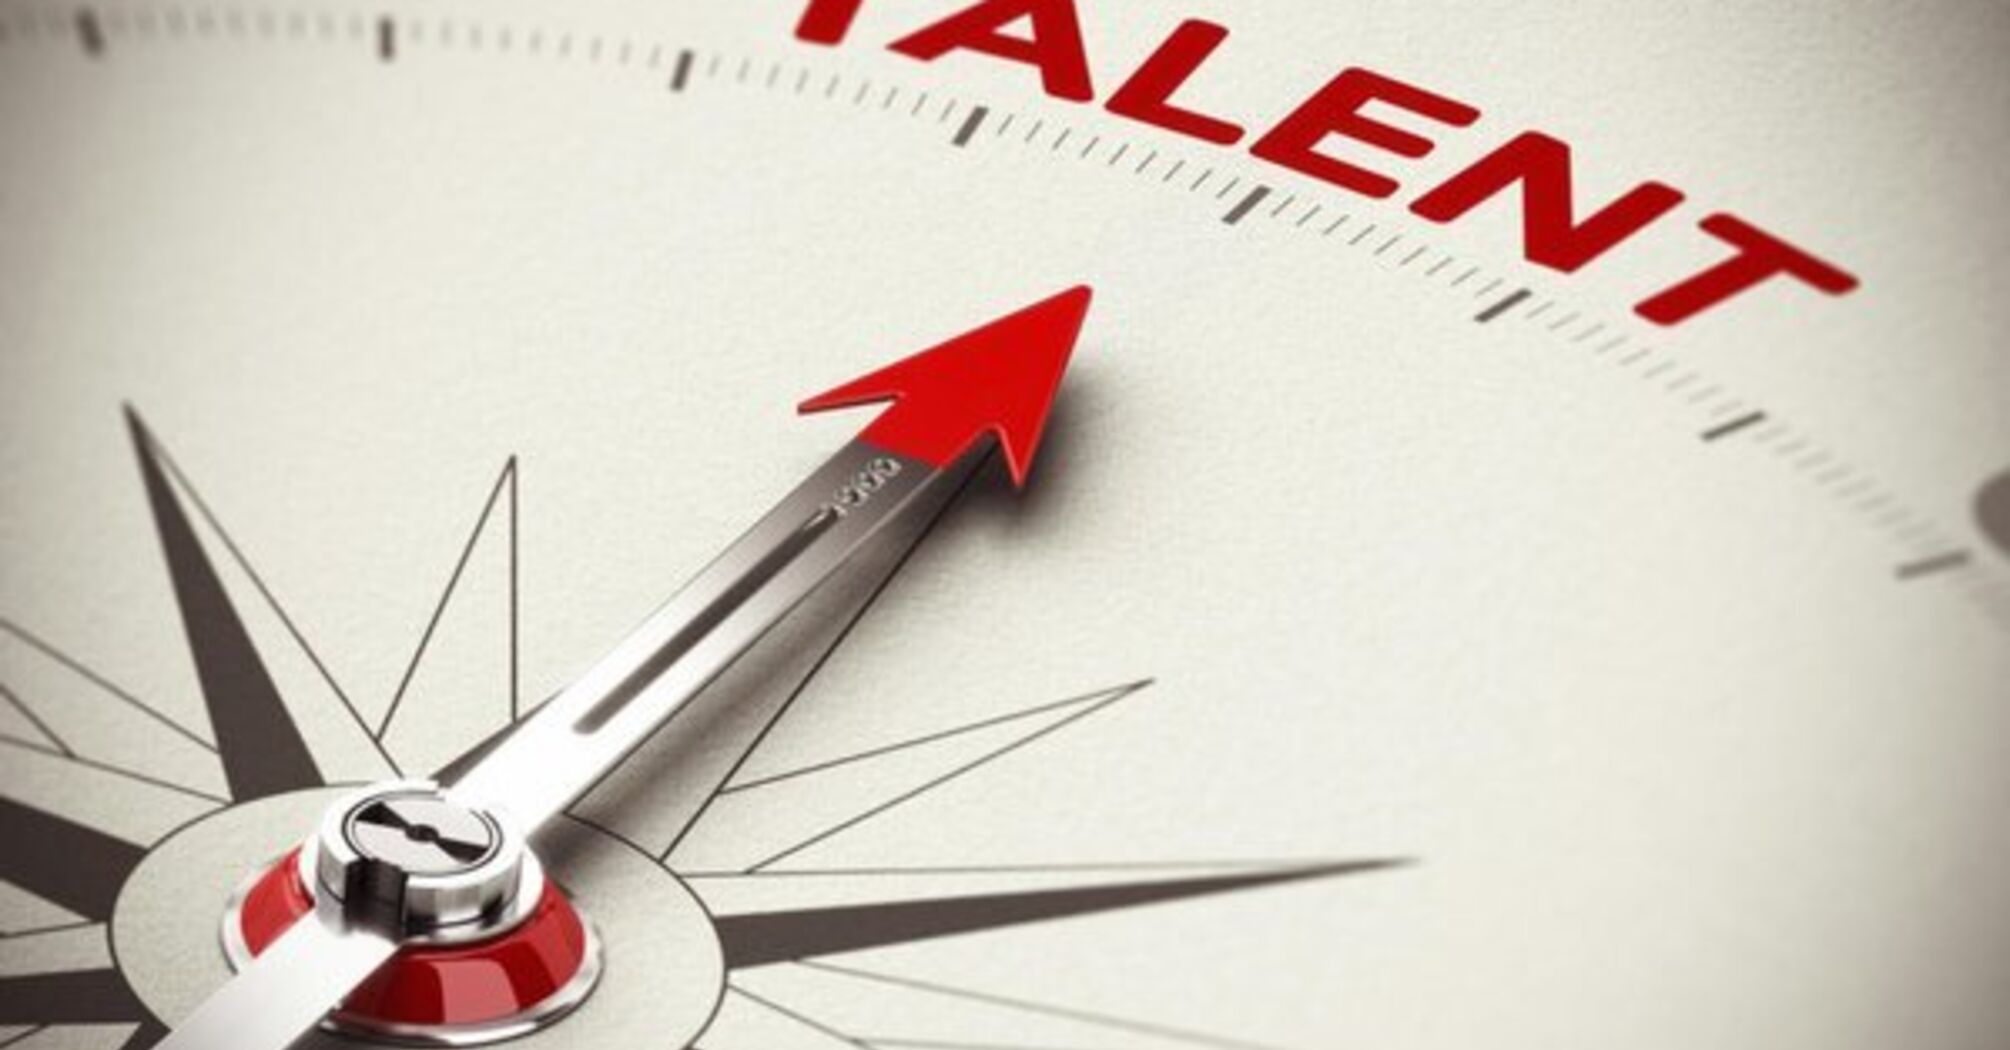 How to develop your talents